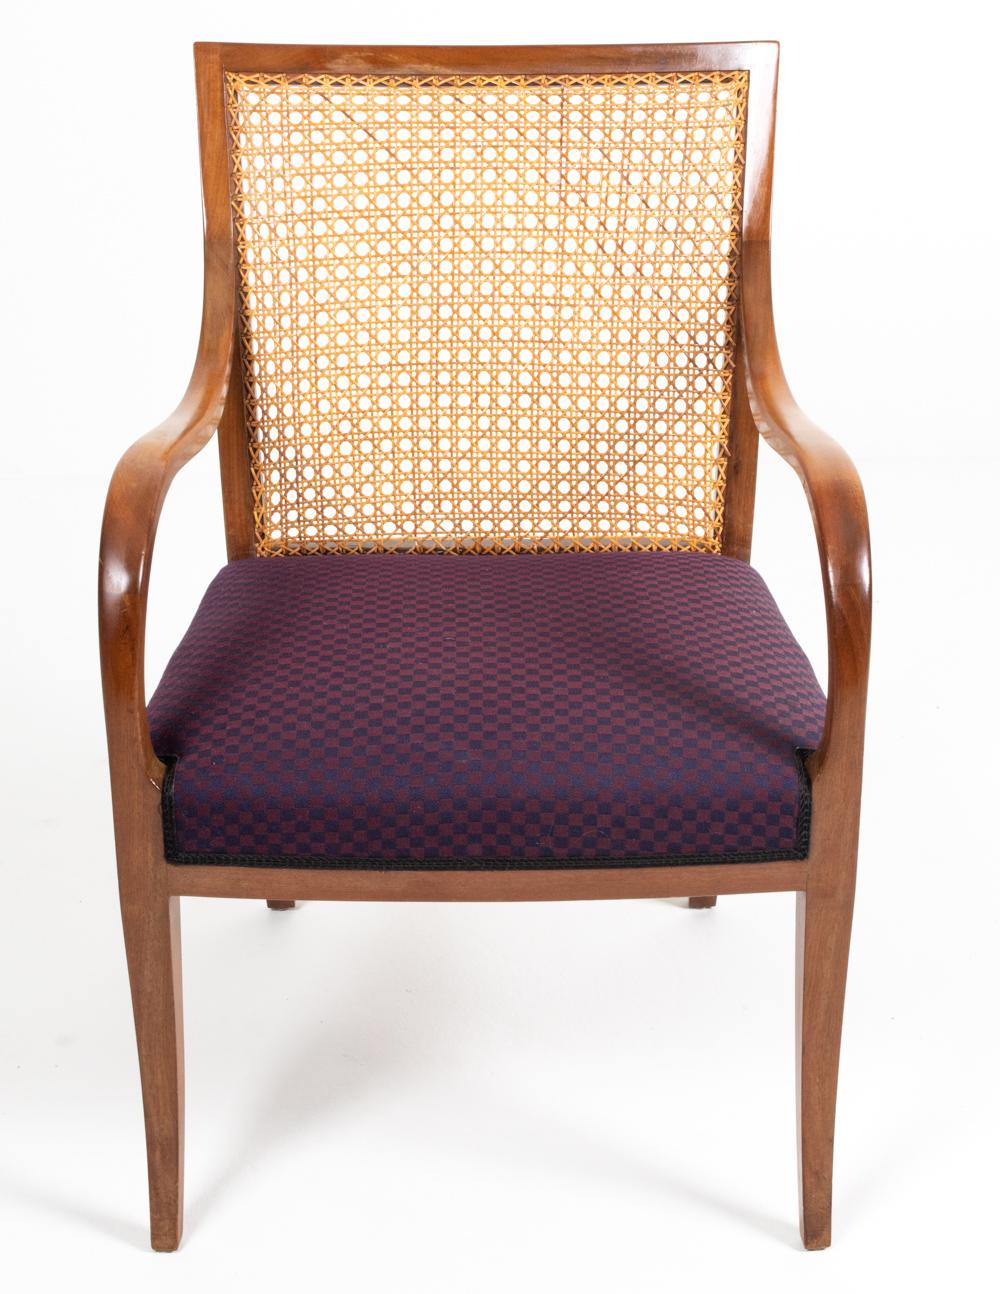 Frits Henningsen Danish Mahogany & Caned Armchair, c. 1940's In Good Condition For Sale In Norwalk, CT